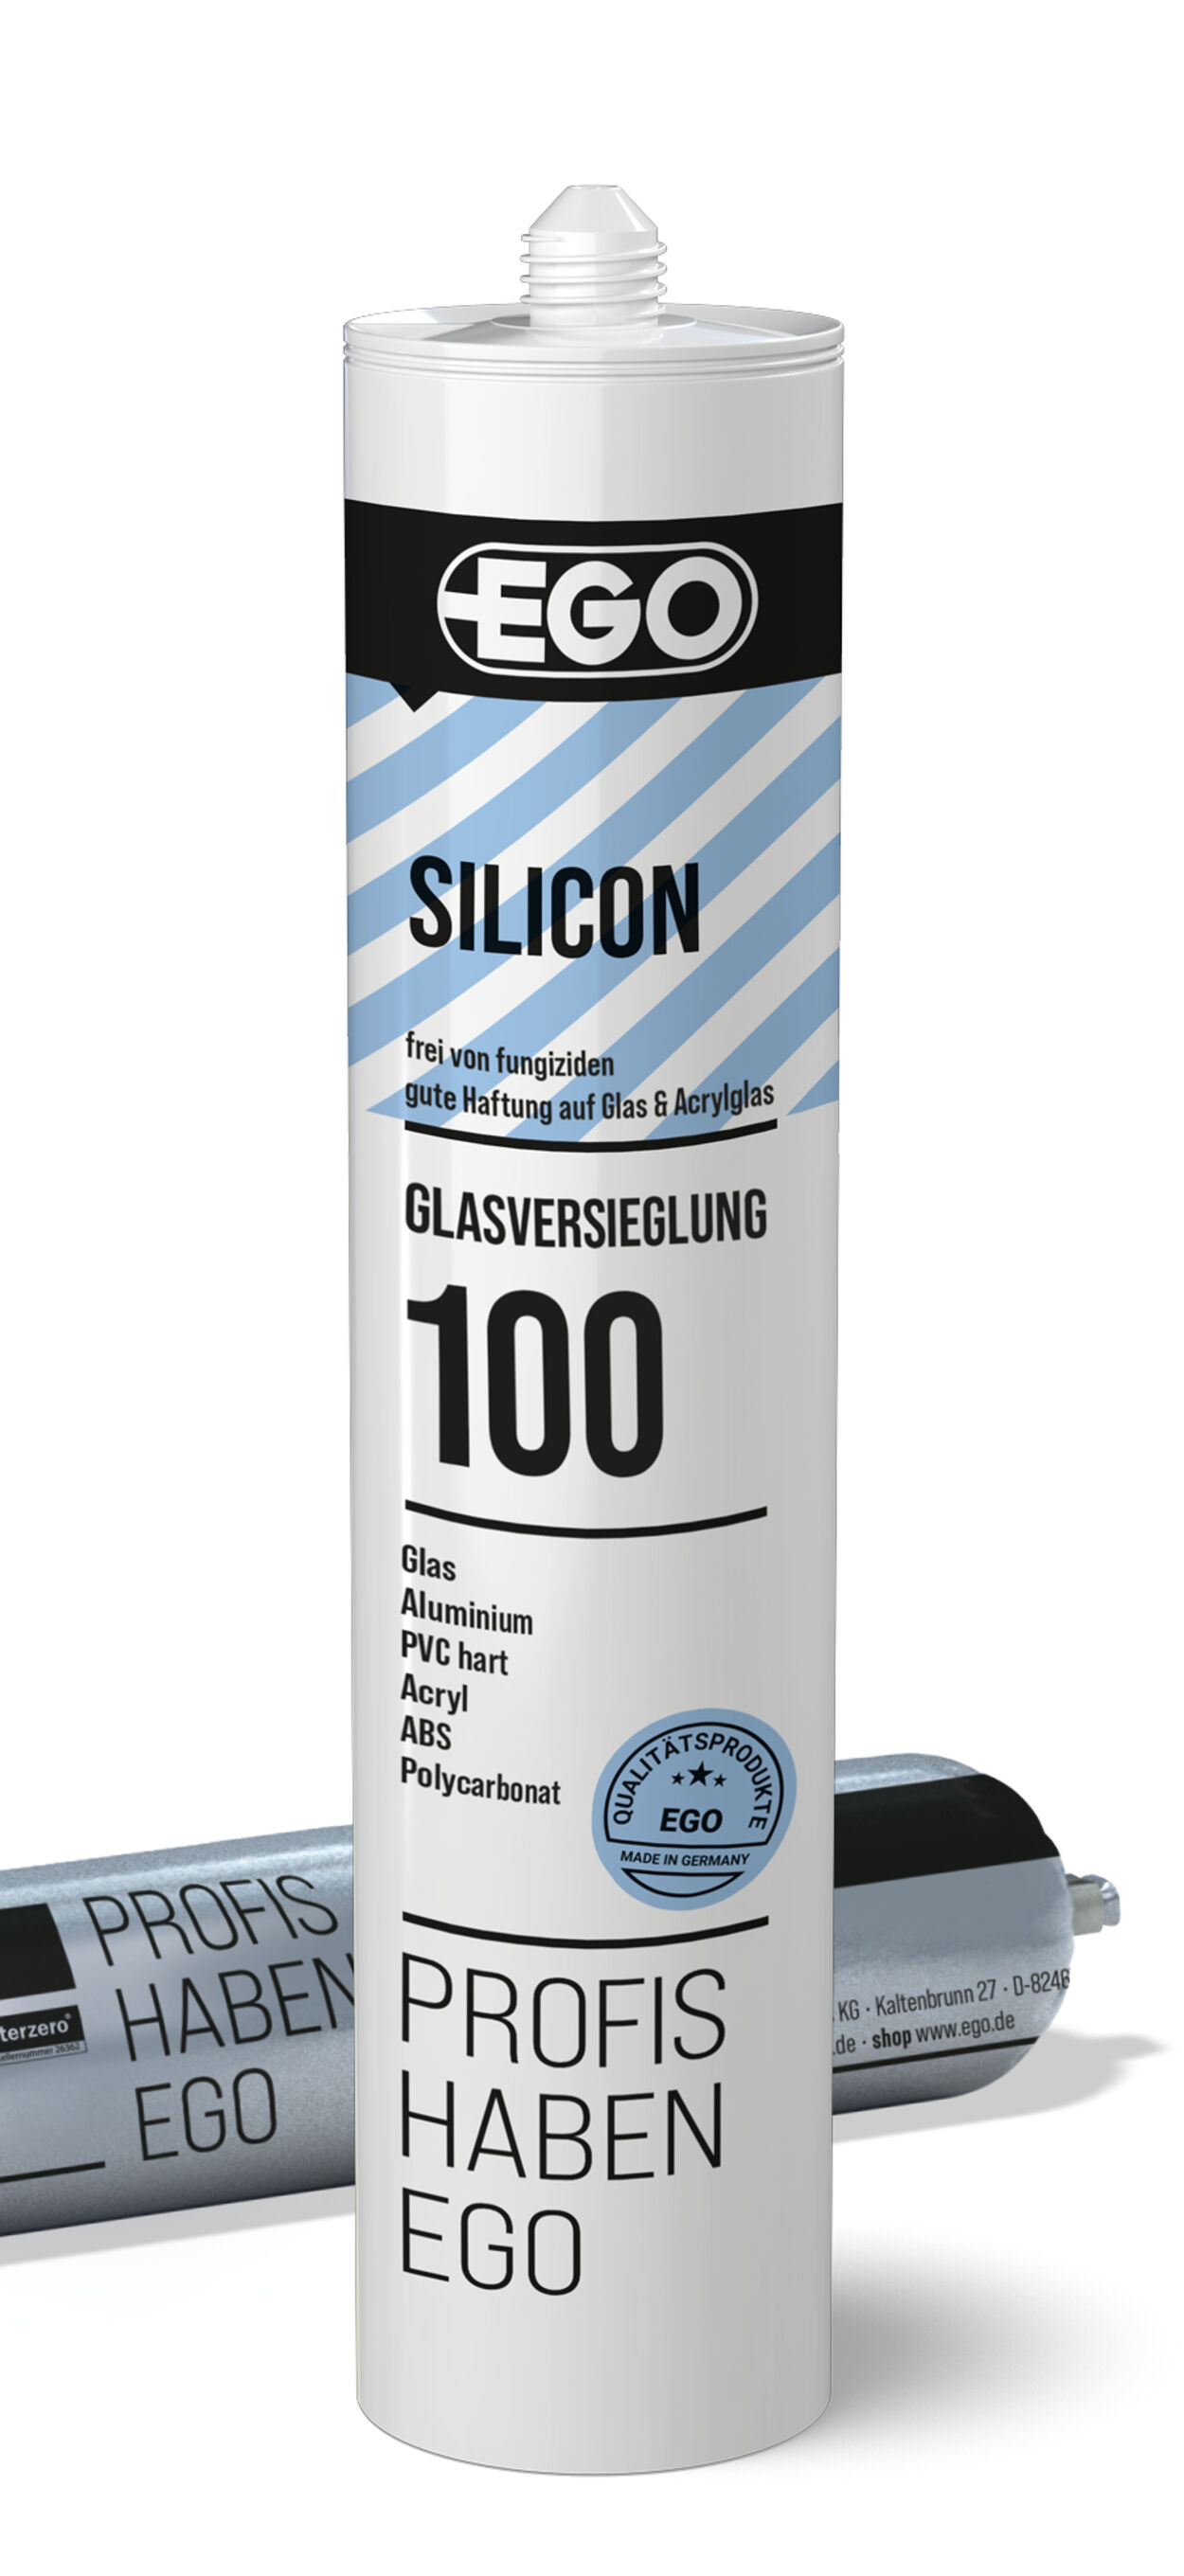 Silicone sealant for glass sealing